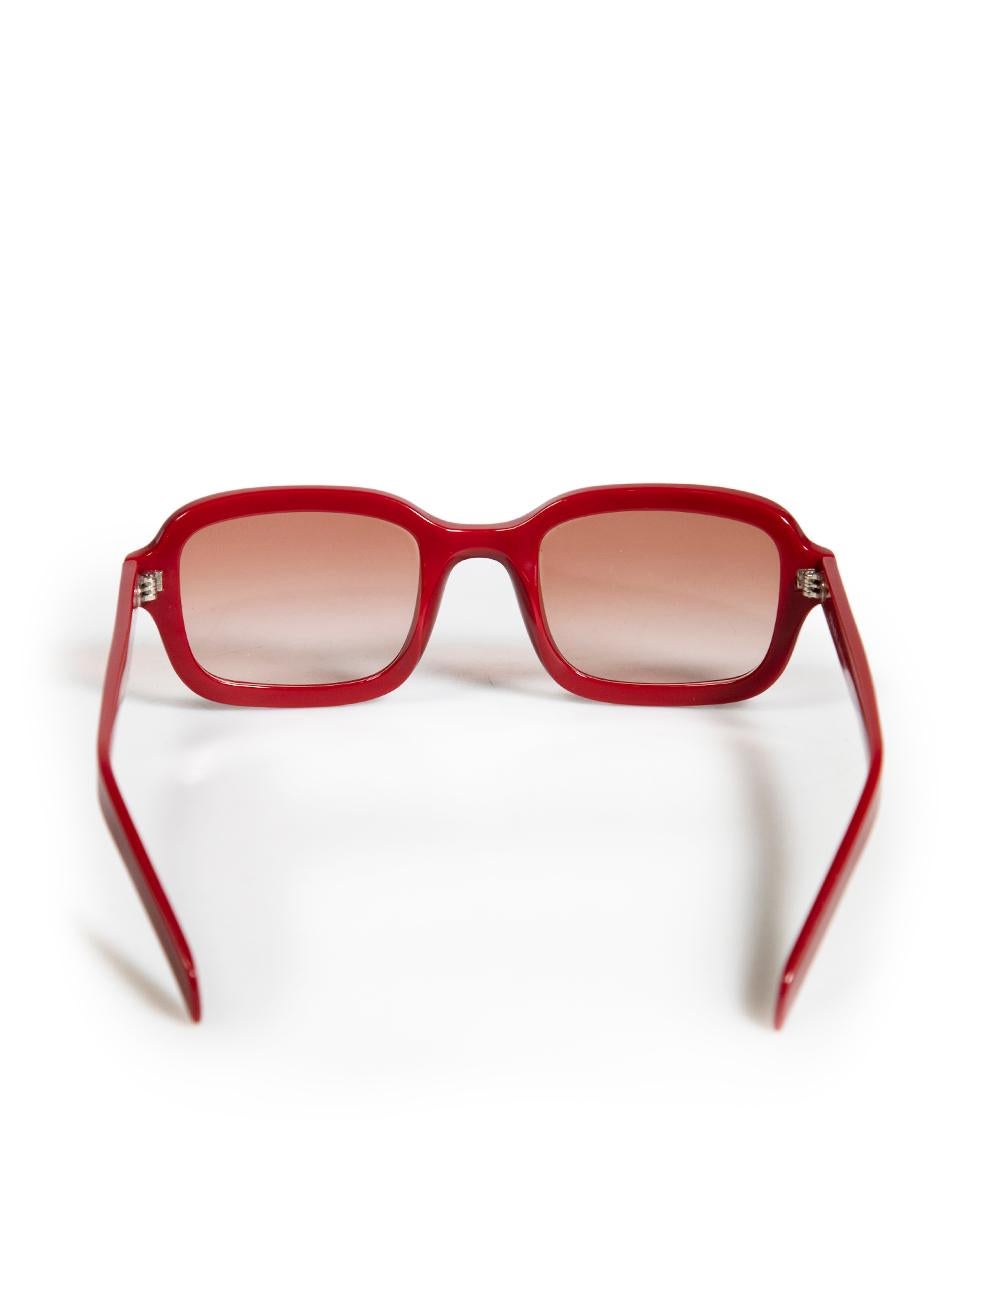 Prada Red Square Frame Tinted Sunglasses In Good Condition For Sale In London, GB